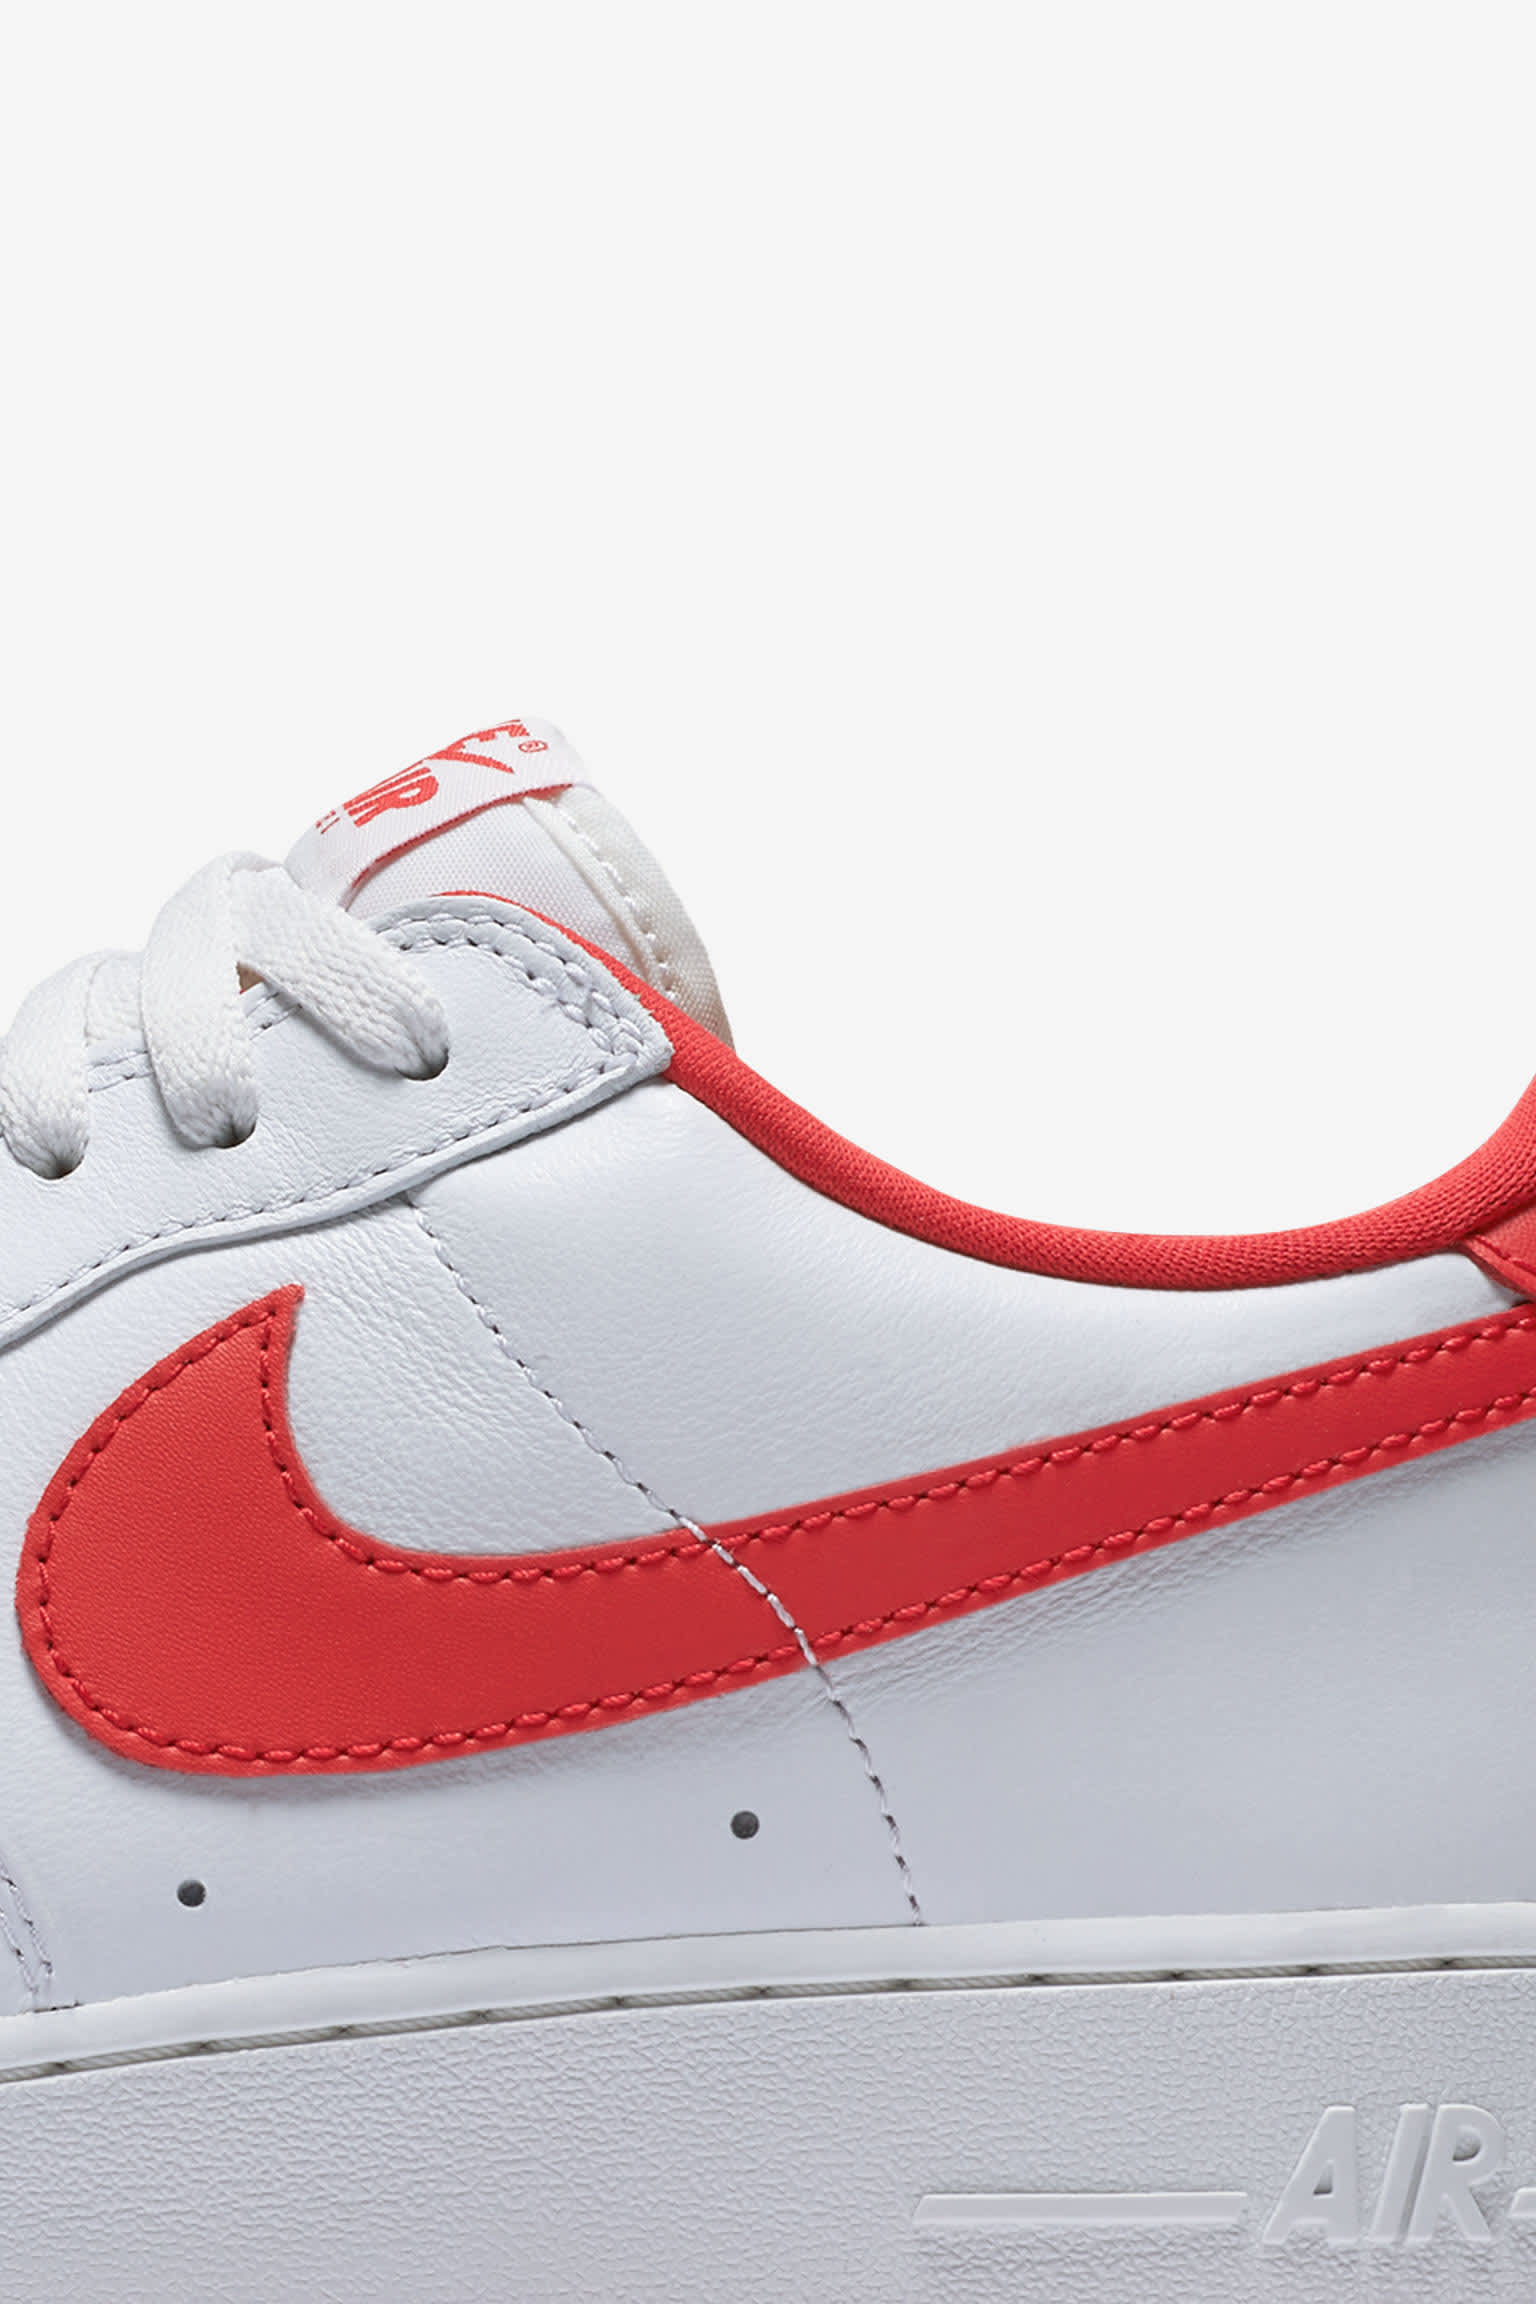 transferir réplica buffet Nike Air Force 1 Low Retro 'White & University Red' Release Date. Nike SNKRS